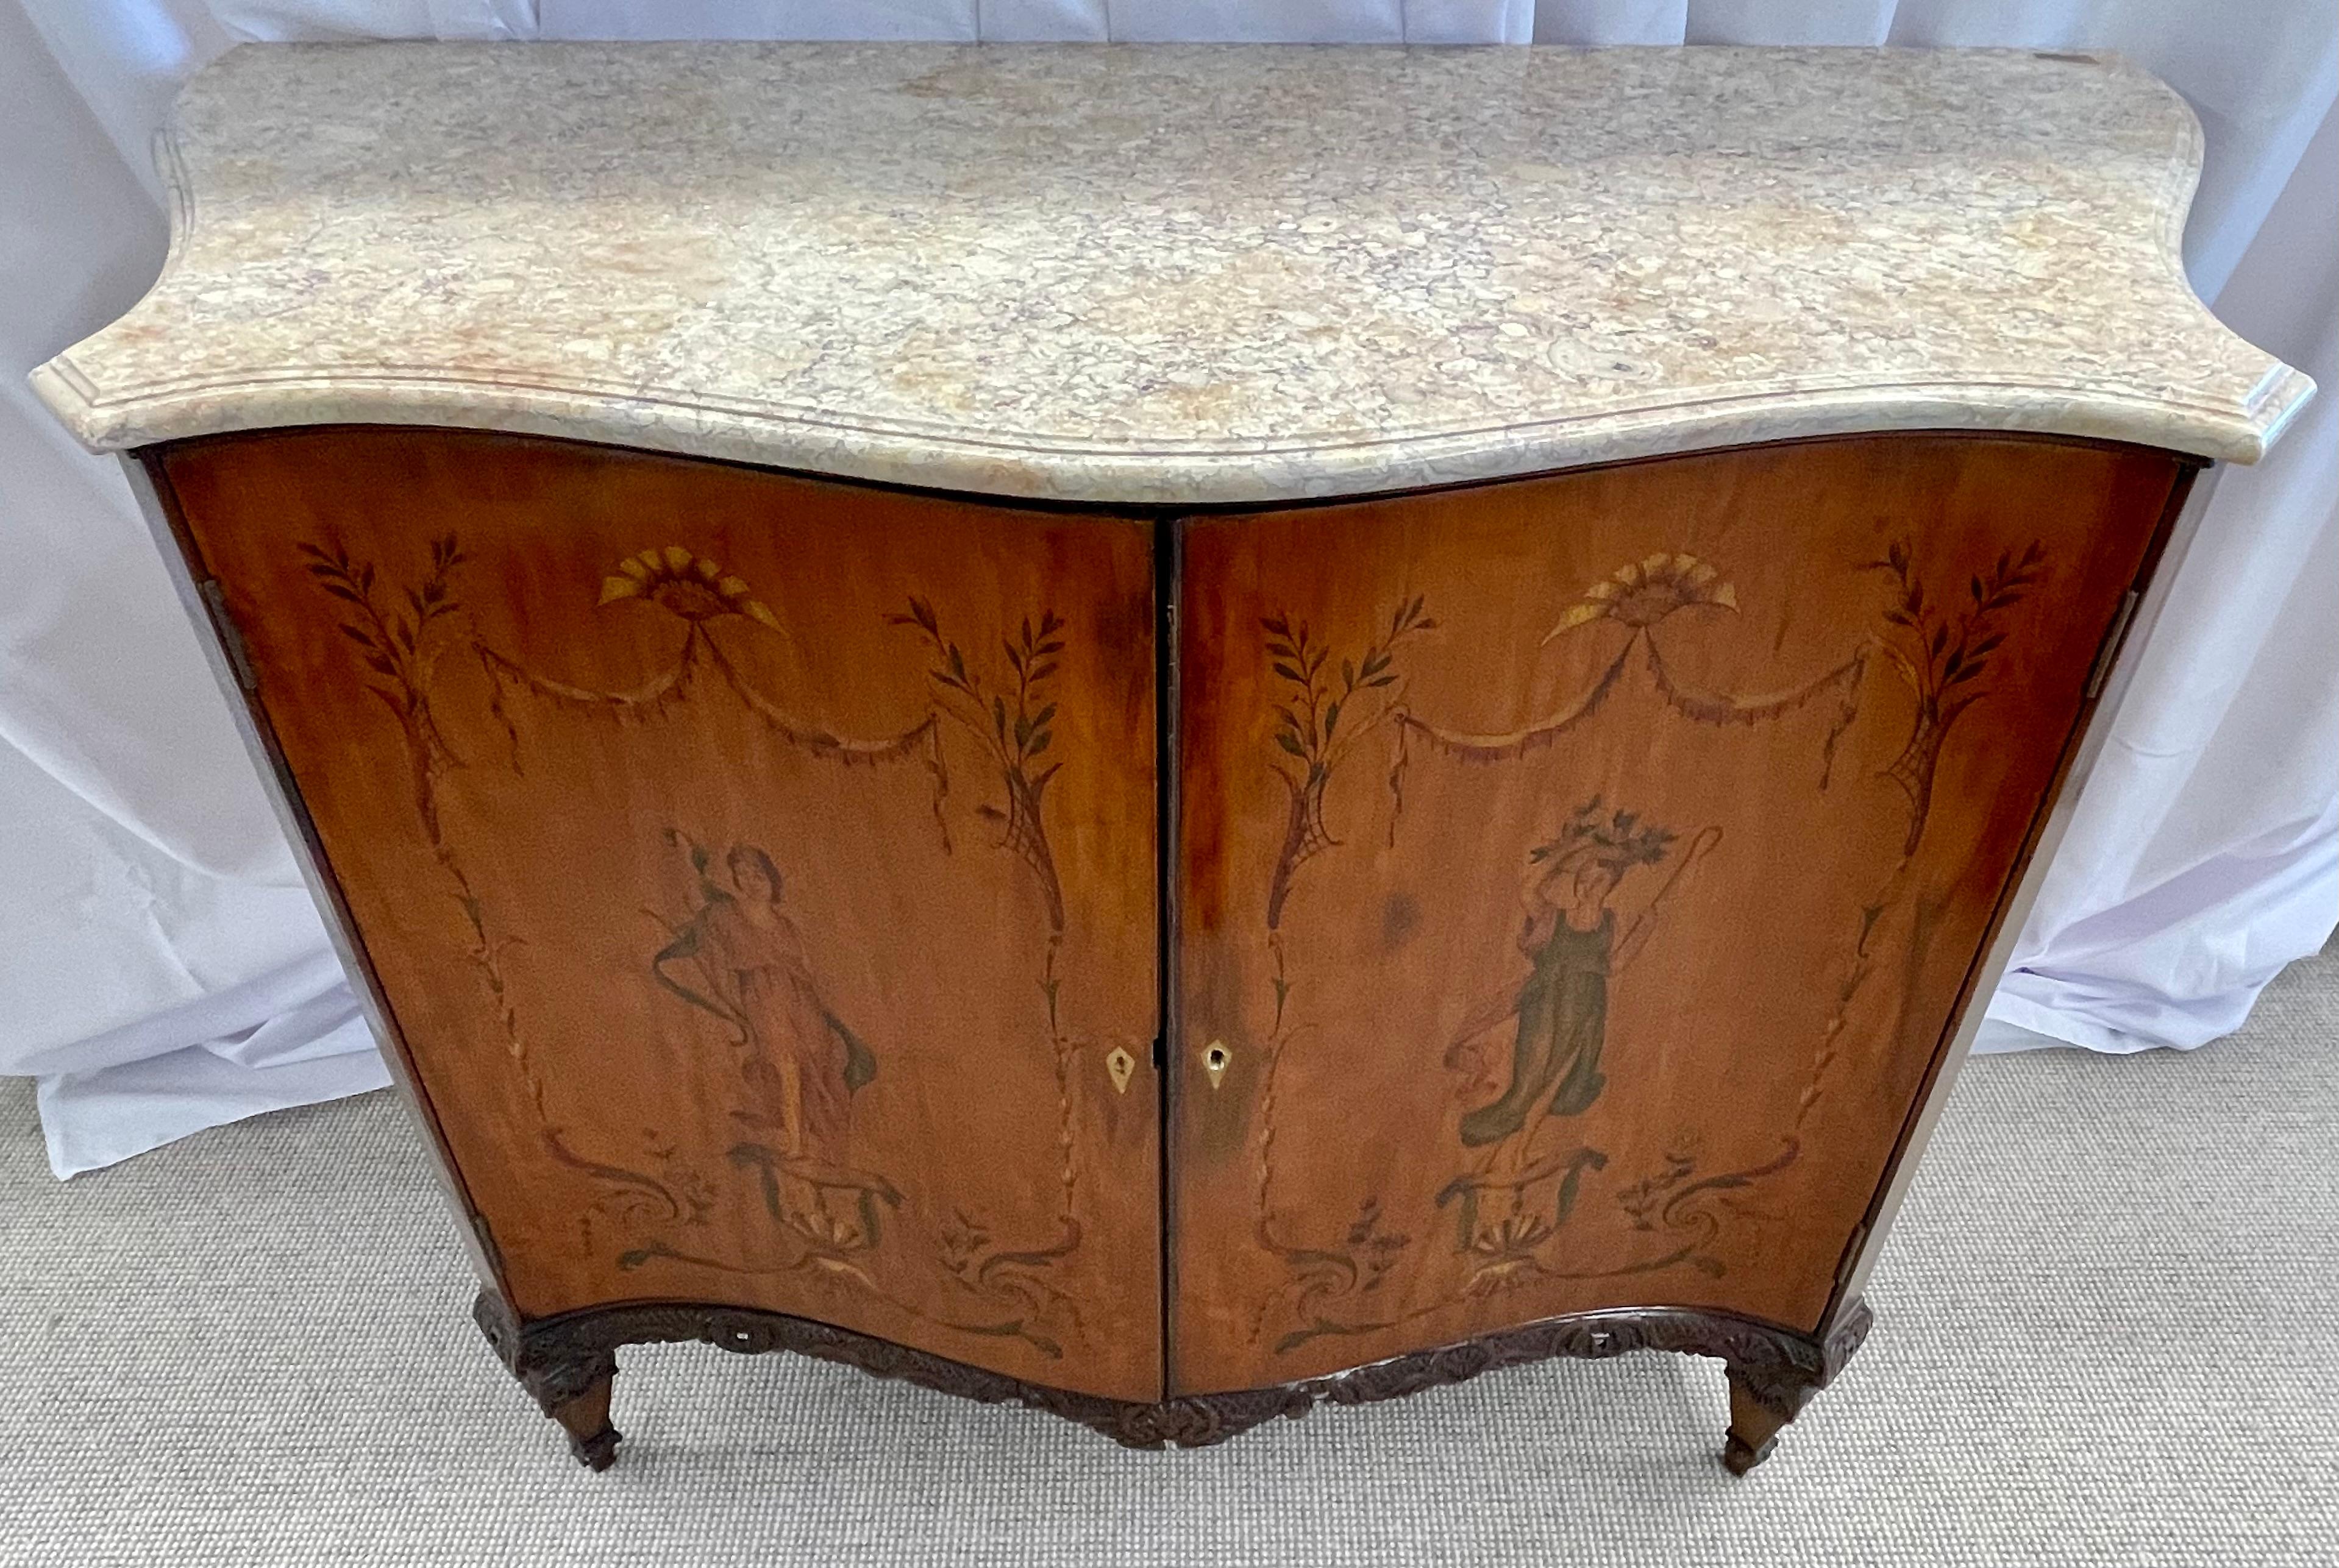 20th Century Edwardian Adams Style Marble-Top Curved Front Finely Detailed Commode For Sale